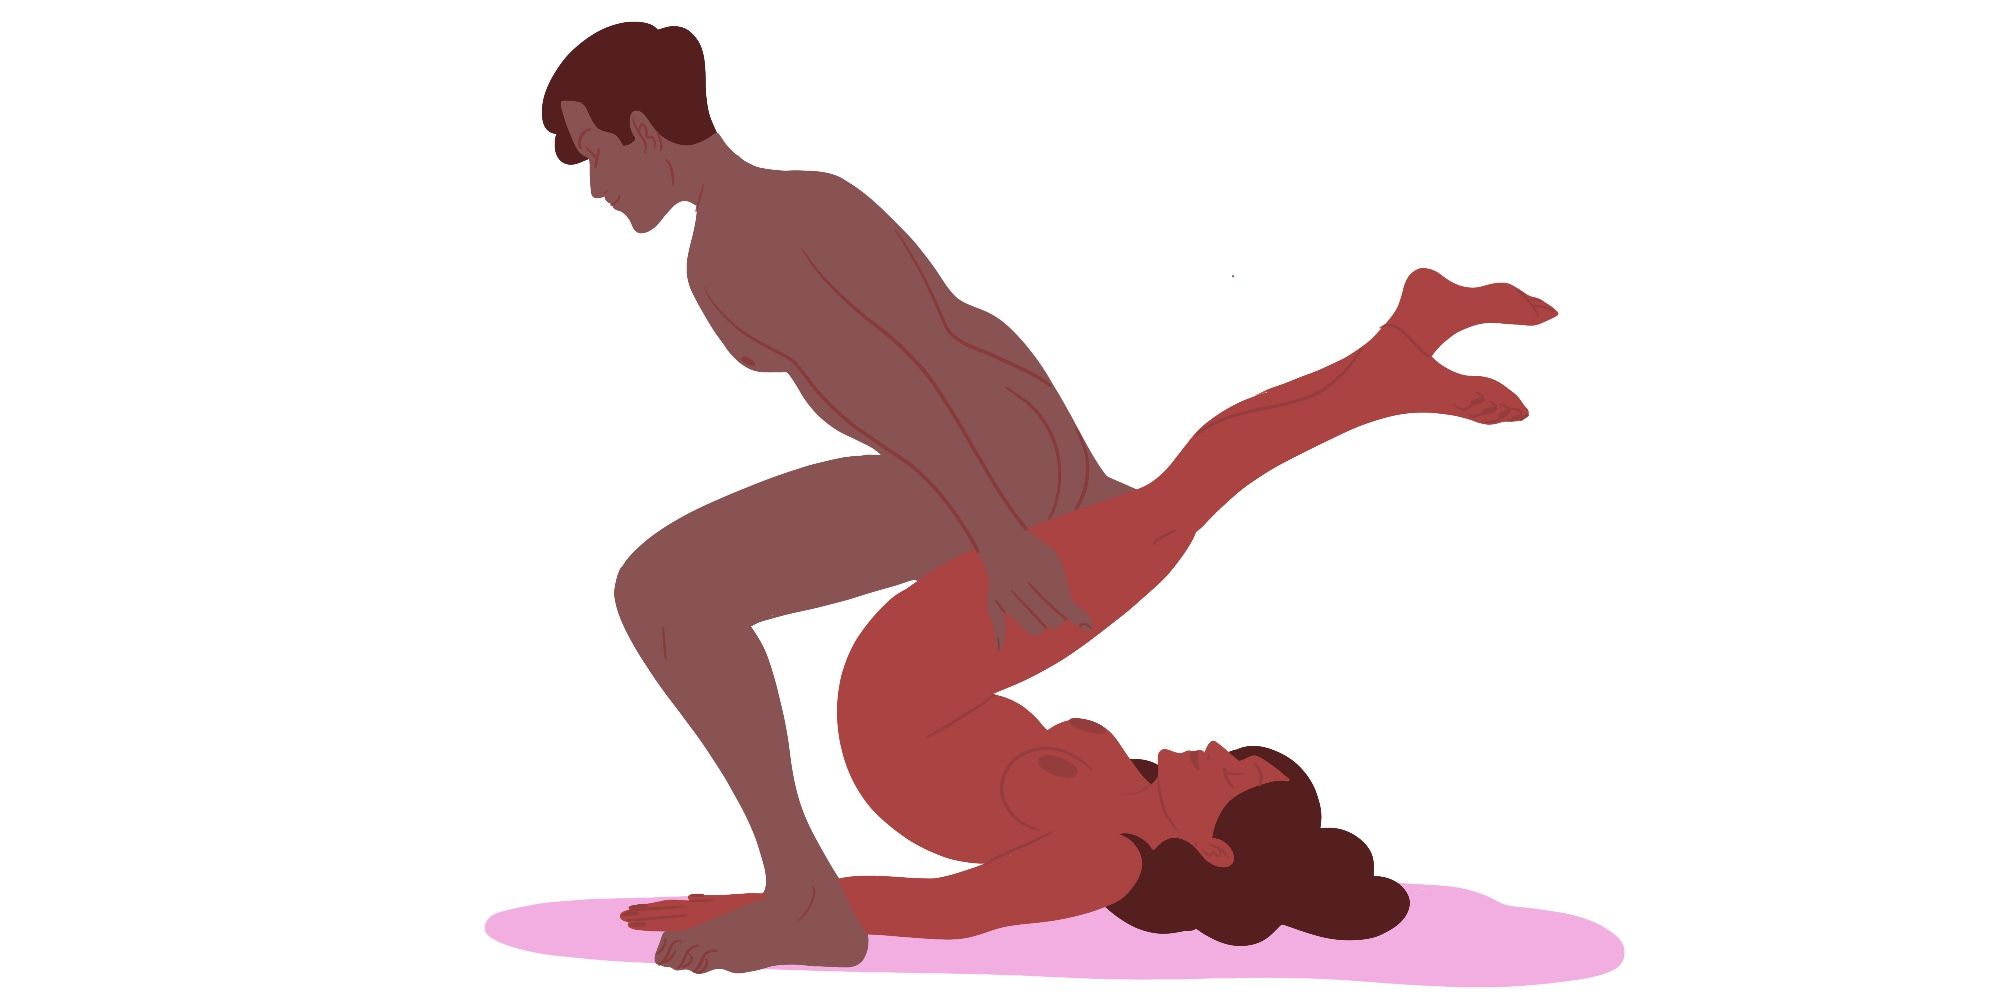 Piledriver Sex Position - Piledriver Sex Position - What It Is and How to Do It Safely